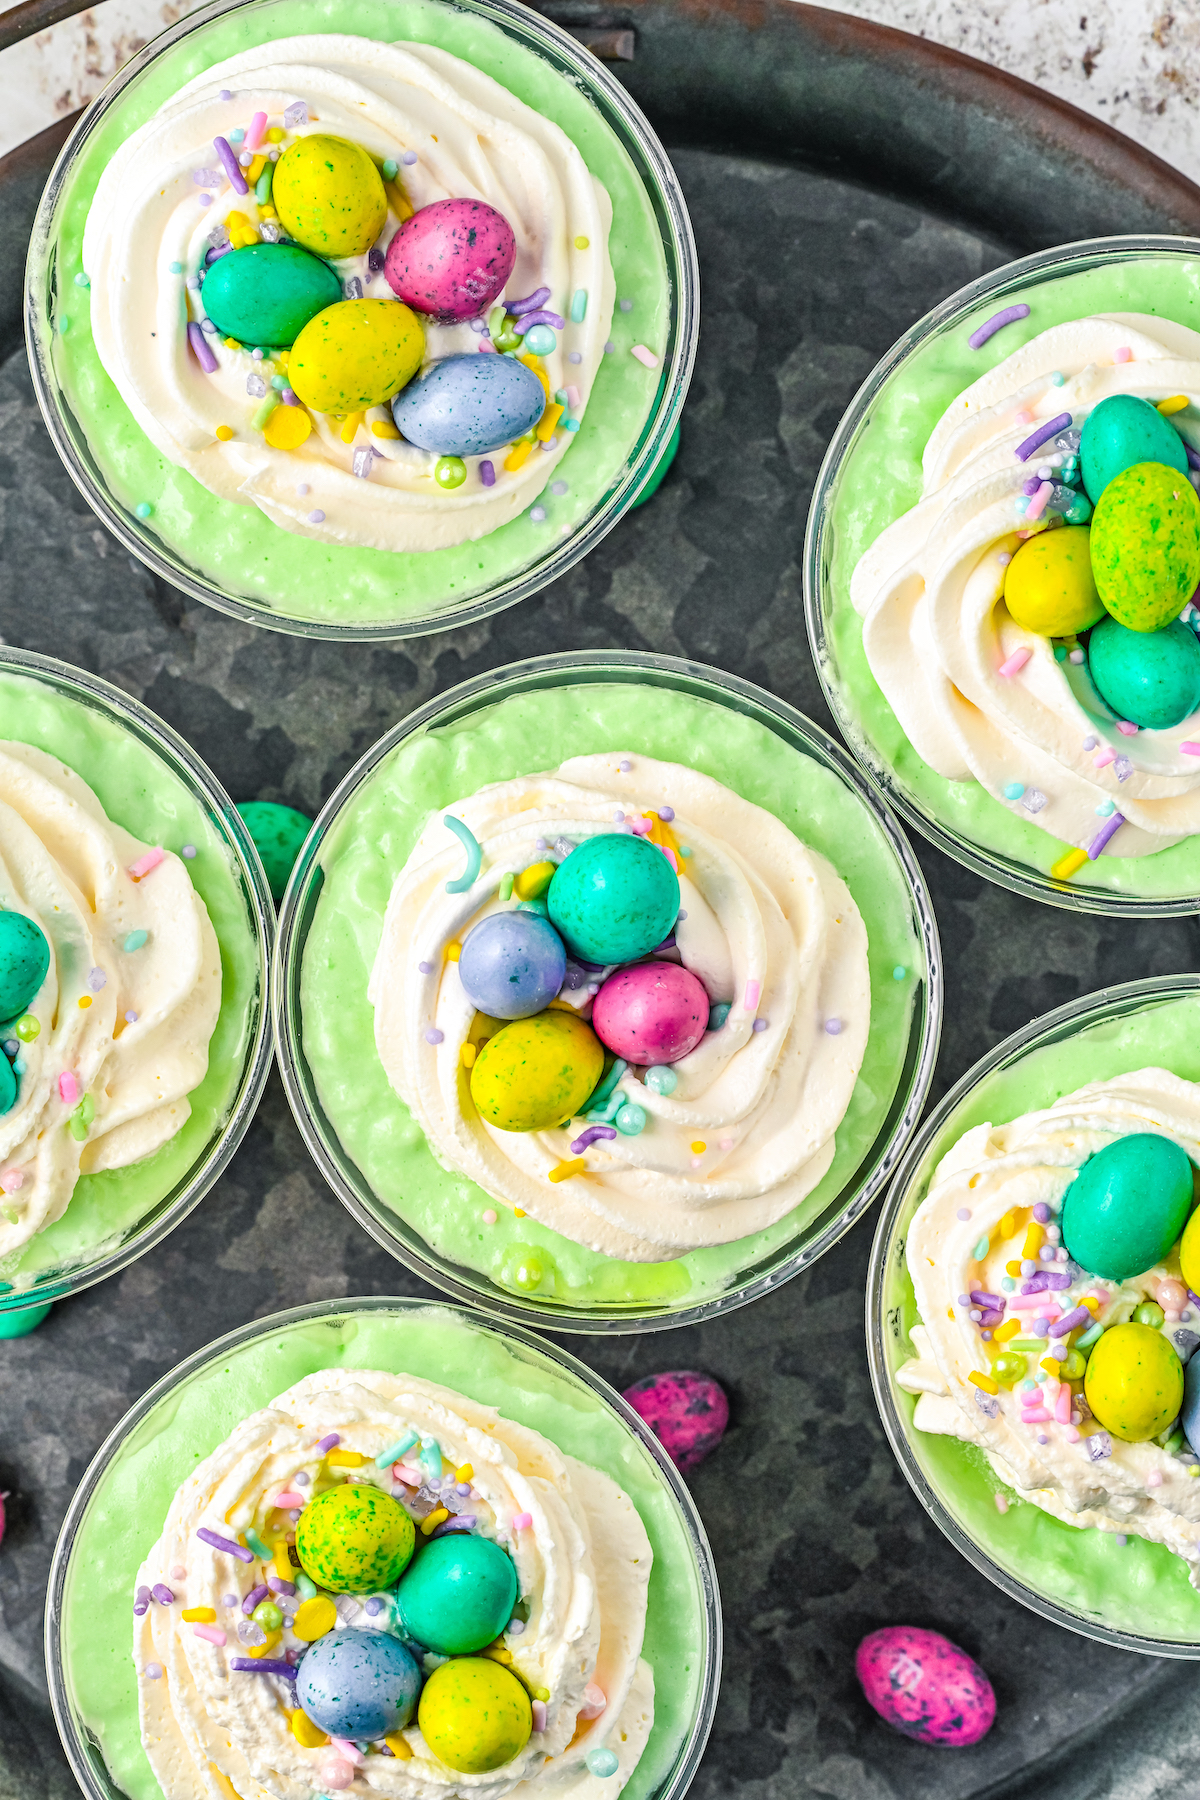 Parfaits topped with sprinkles and mini Easter eggs.